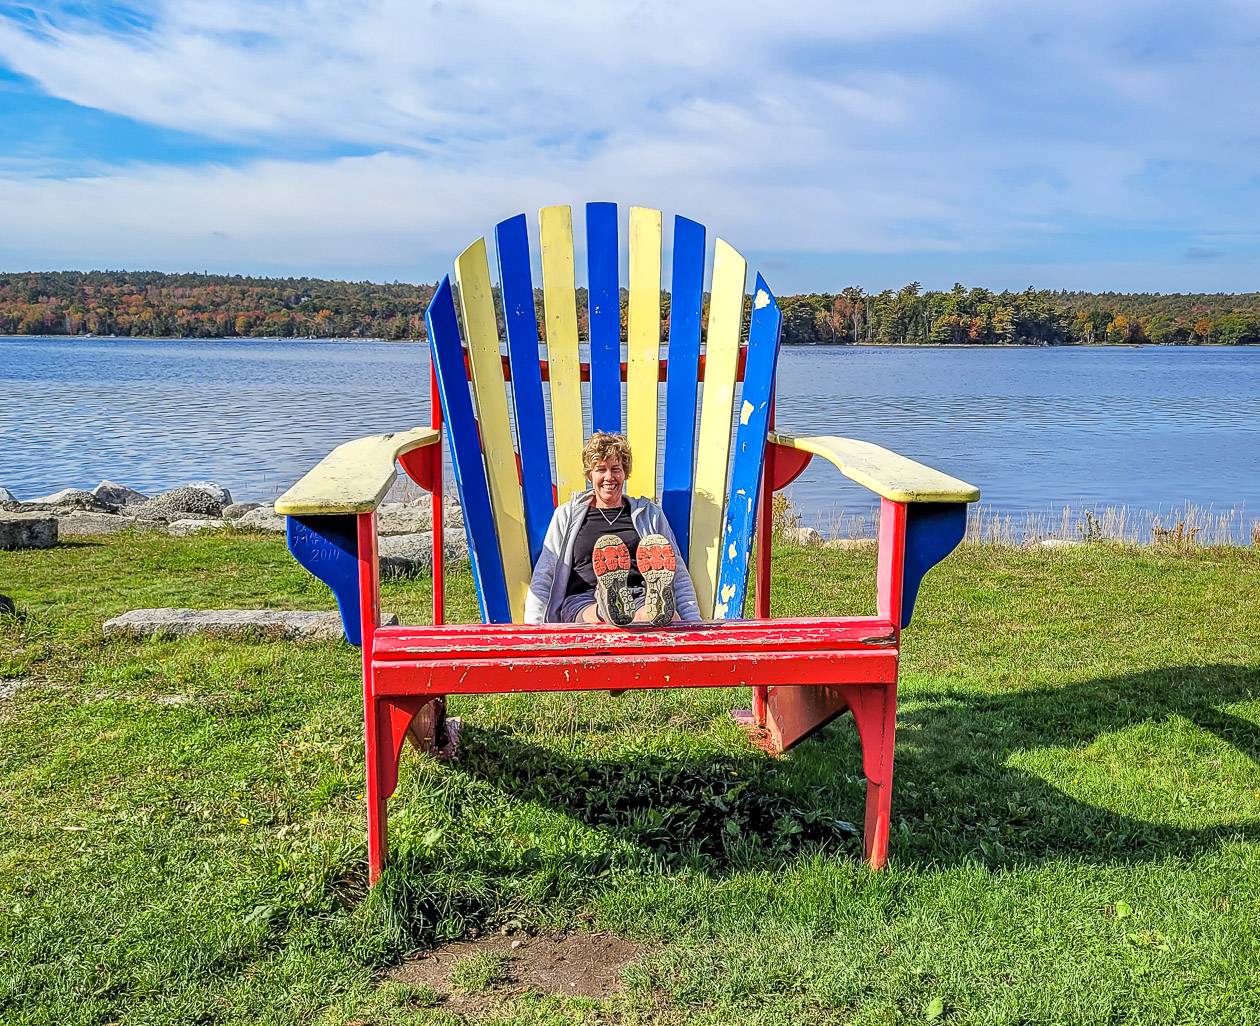 Get your picture taken in the giant chair by the water in Shelburne 